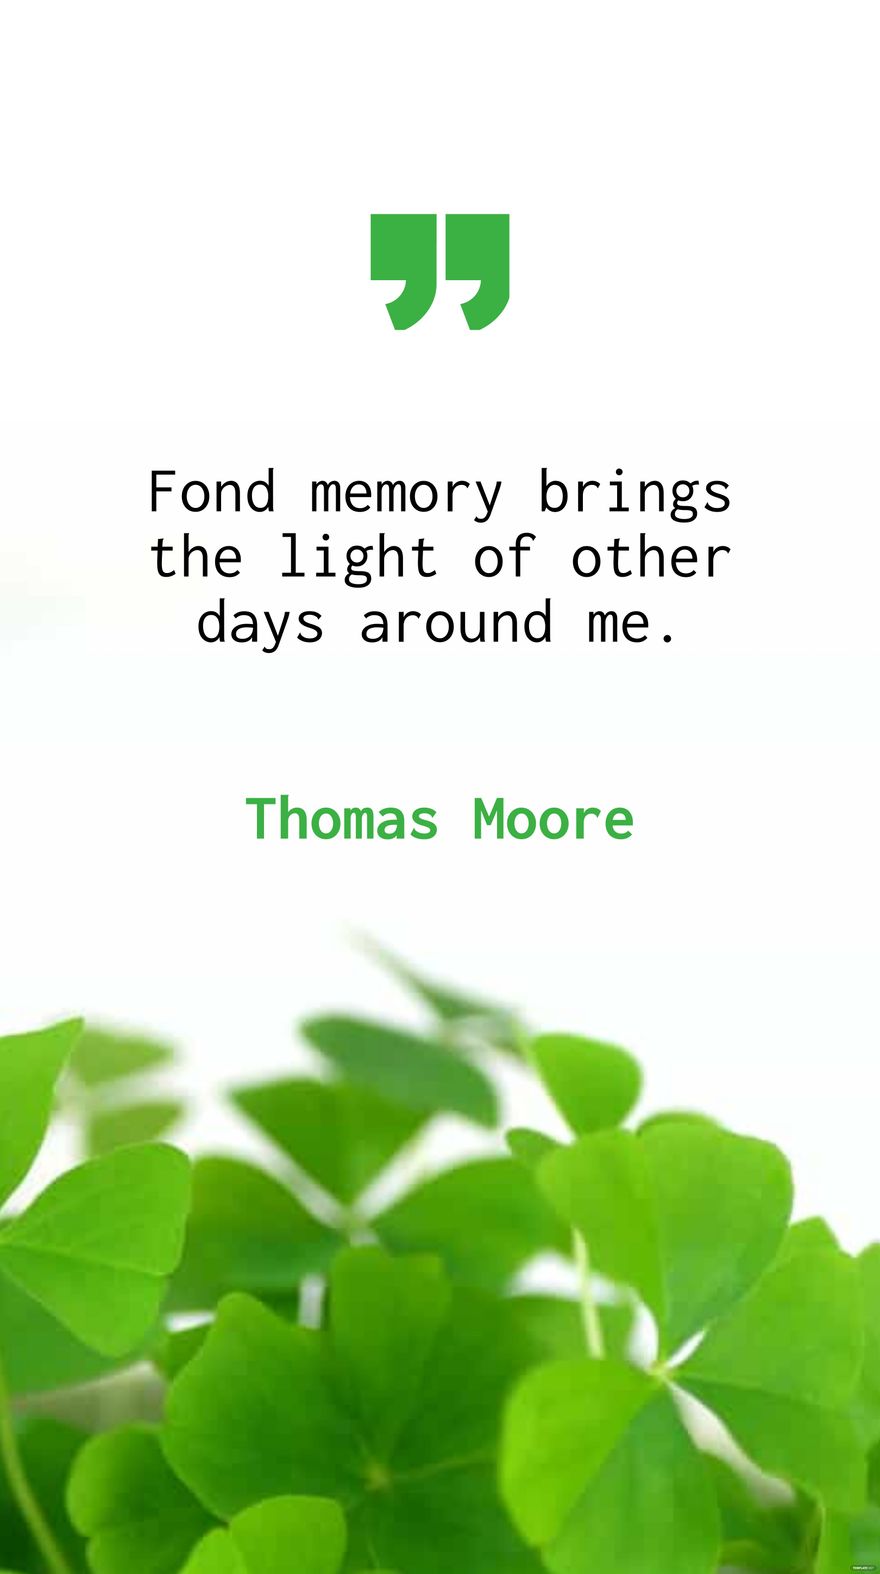 Free Thomas Moore - Fond memory brings the light of other days around me. in JPEG